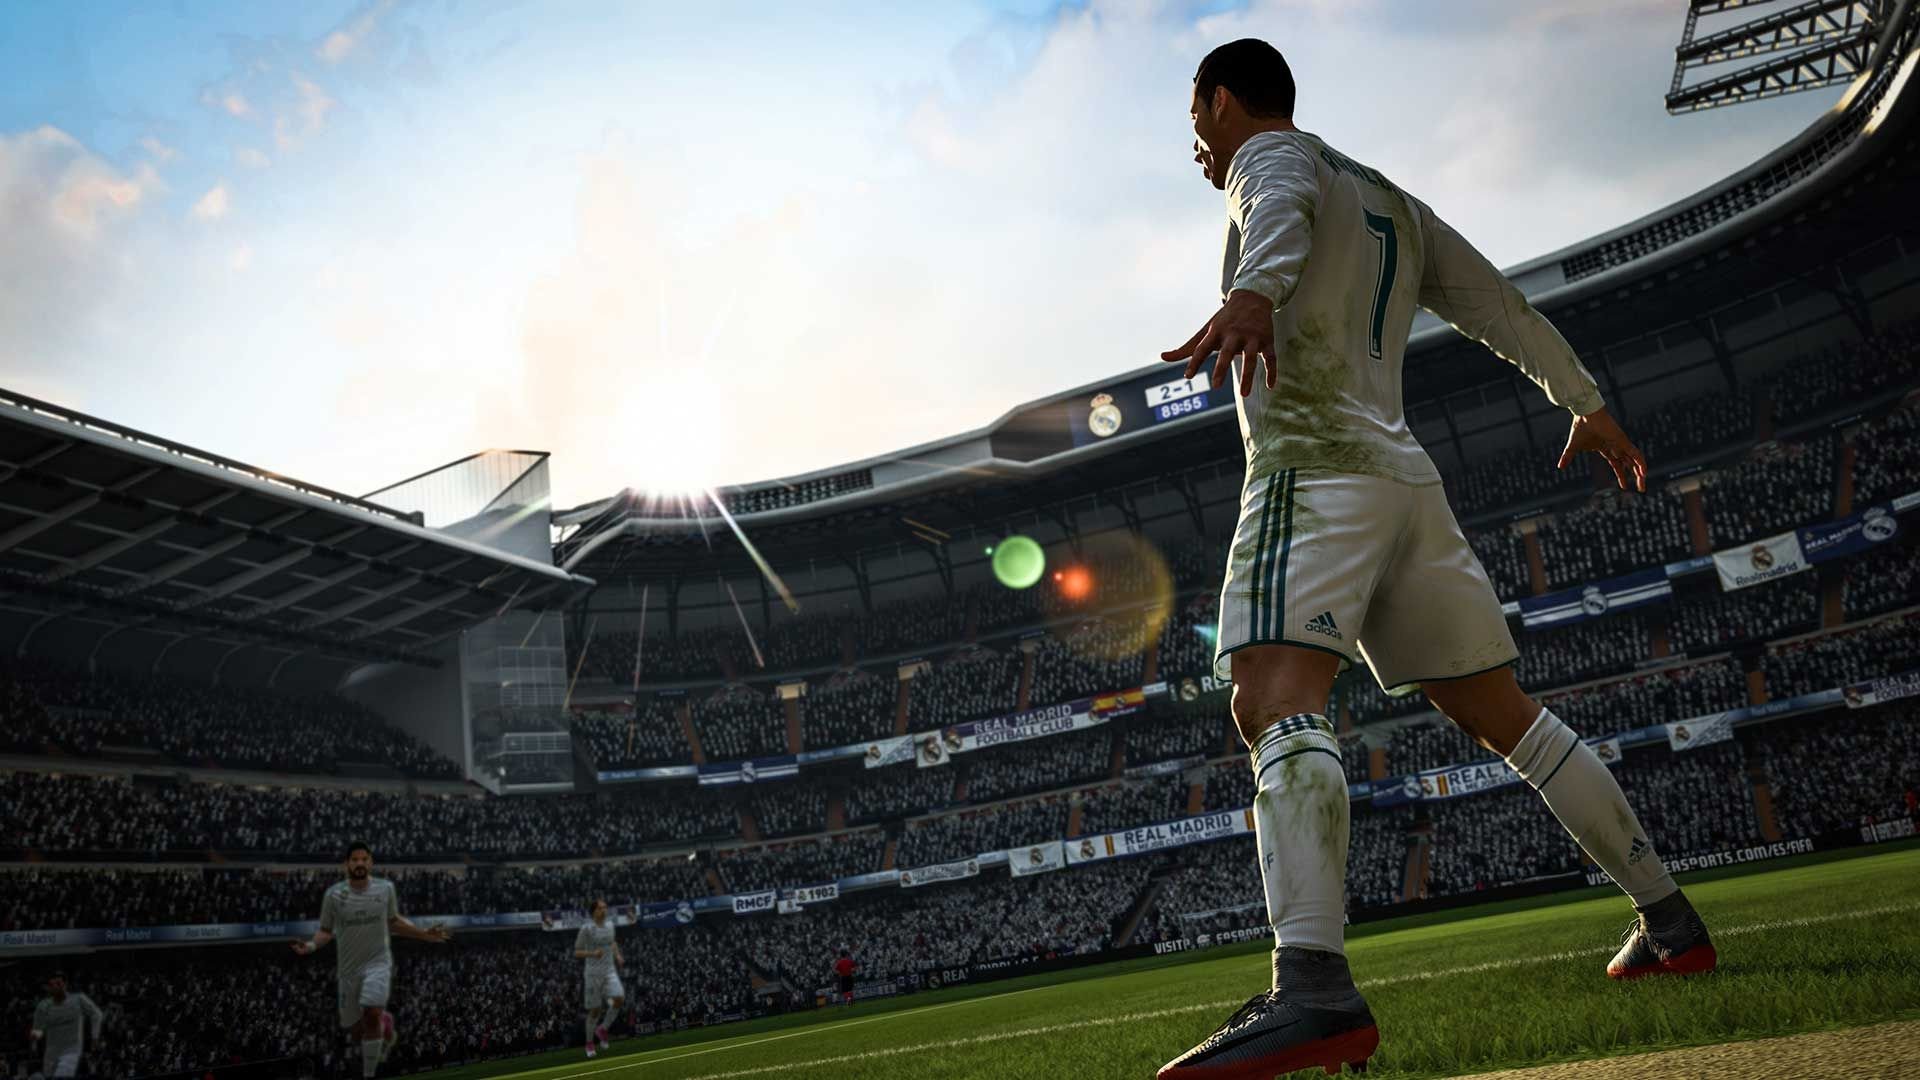 download fifa 11 ps4 for free